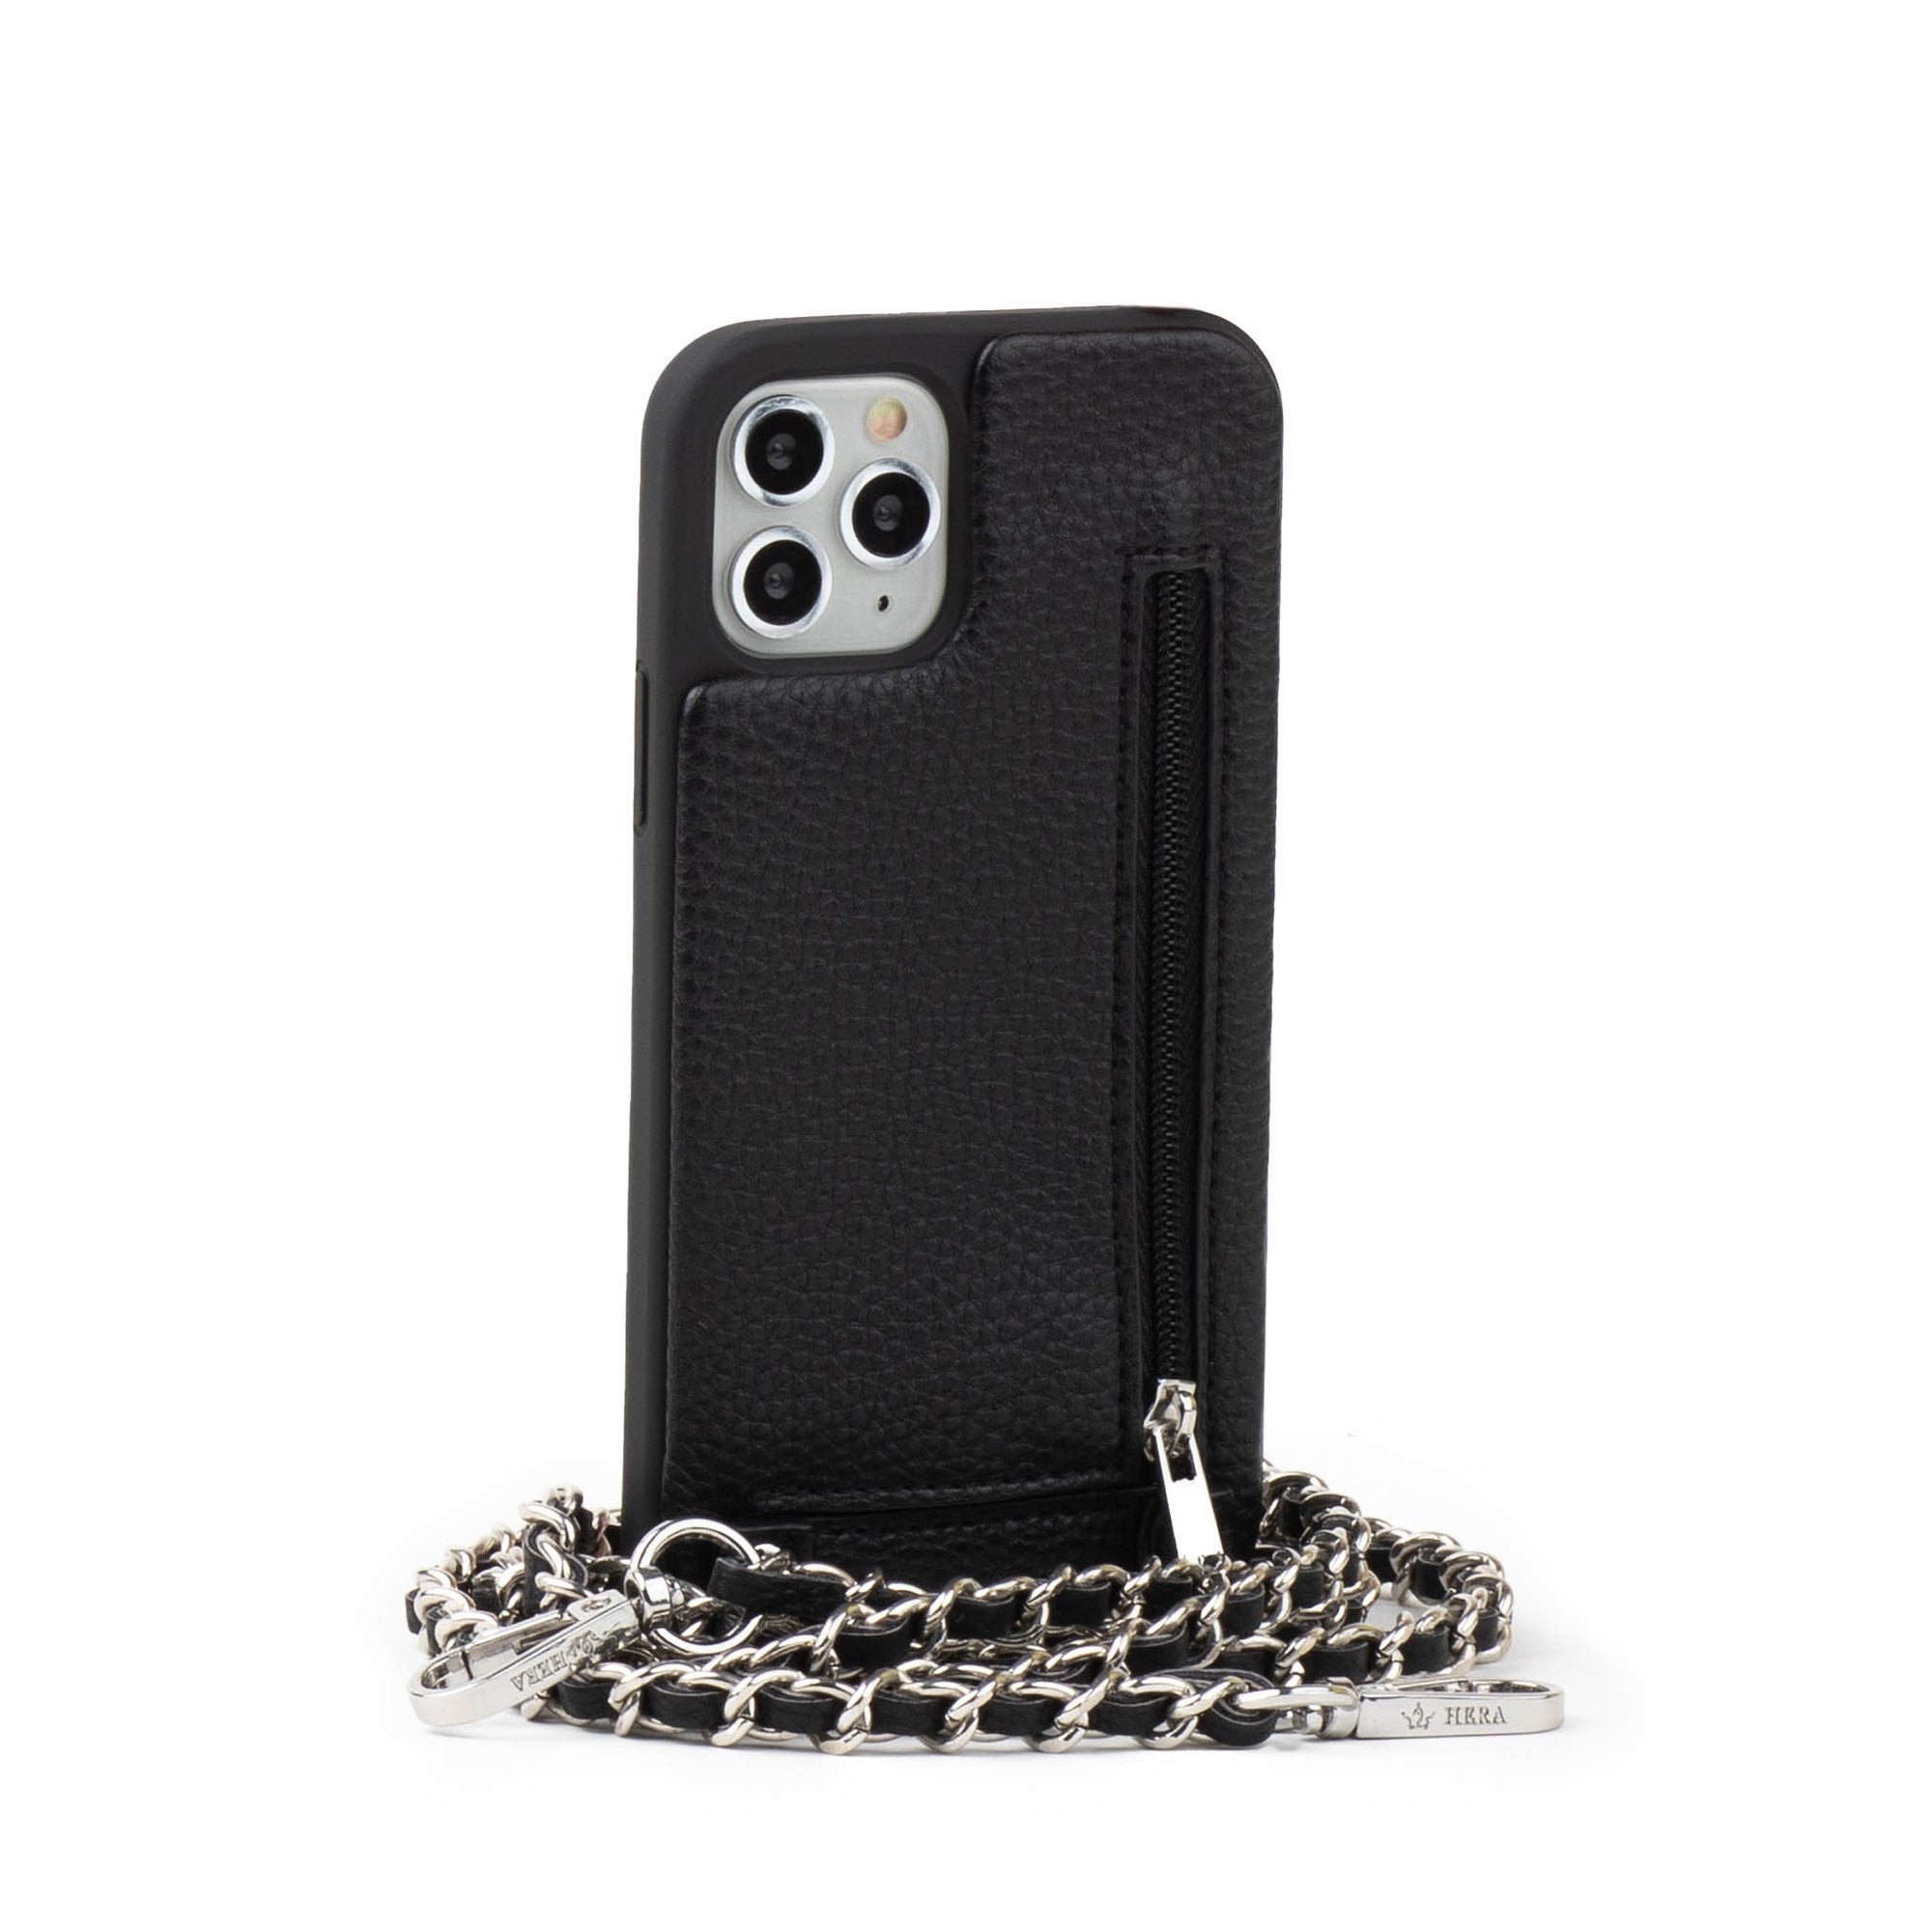 Handbag Wallet Case Crossbody Strap Cover For iPhone 13 Pro Max 12 11 XR XS  7 8+